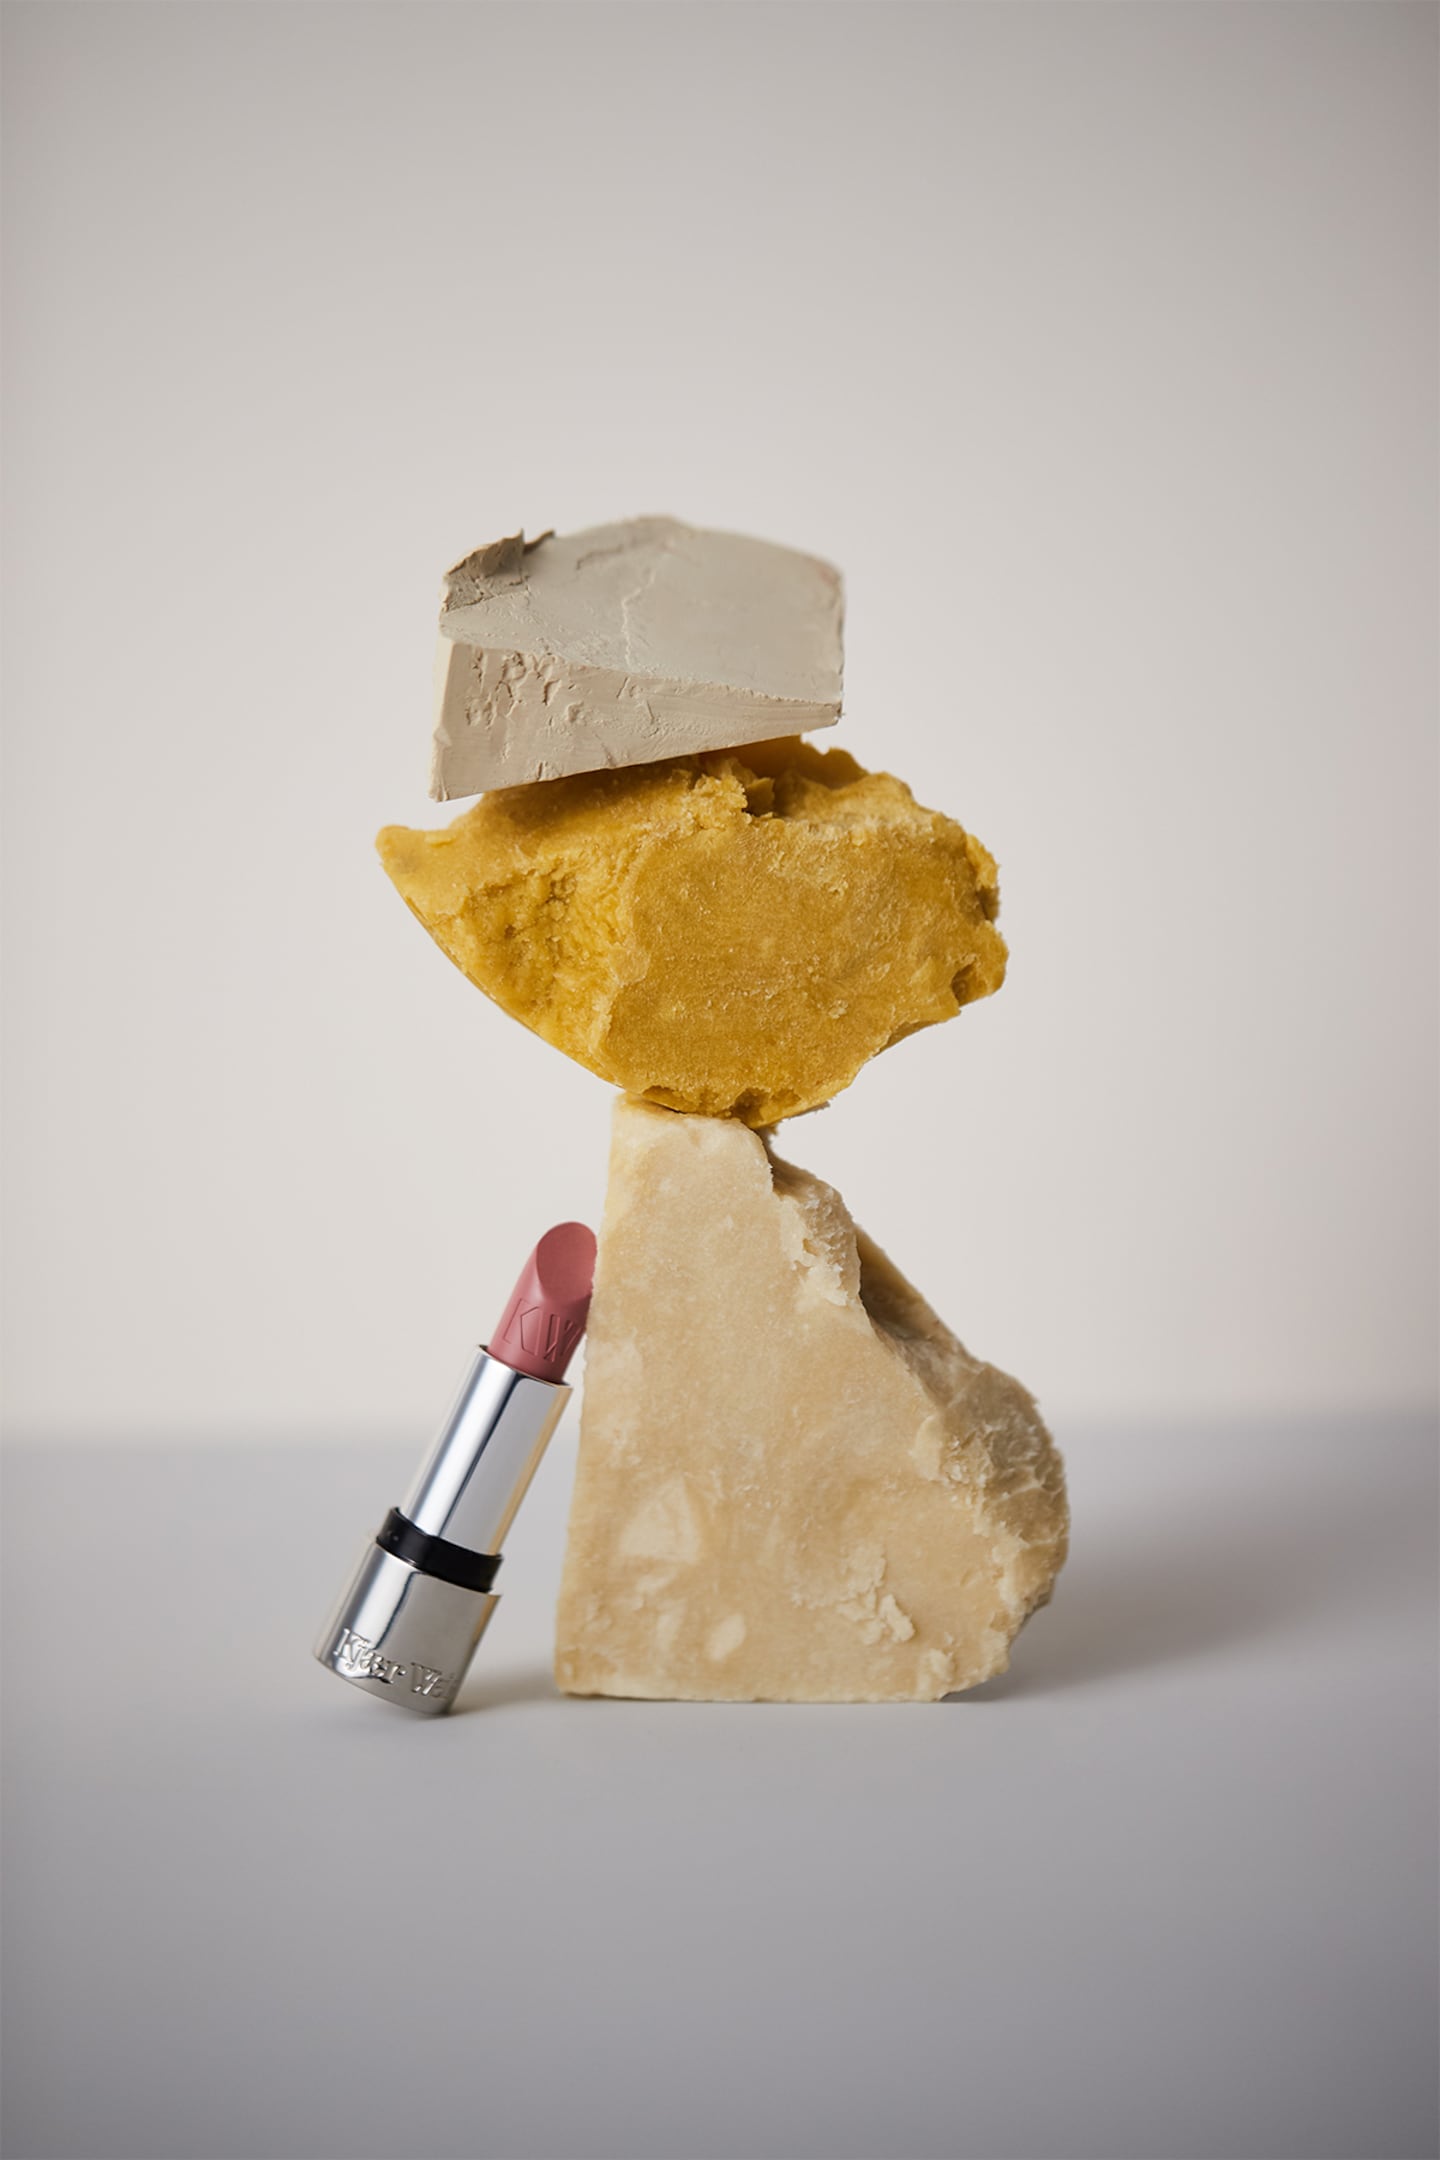 A lipstick perched against to rocks